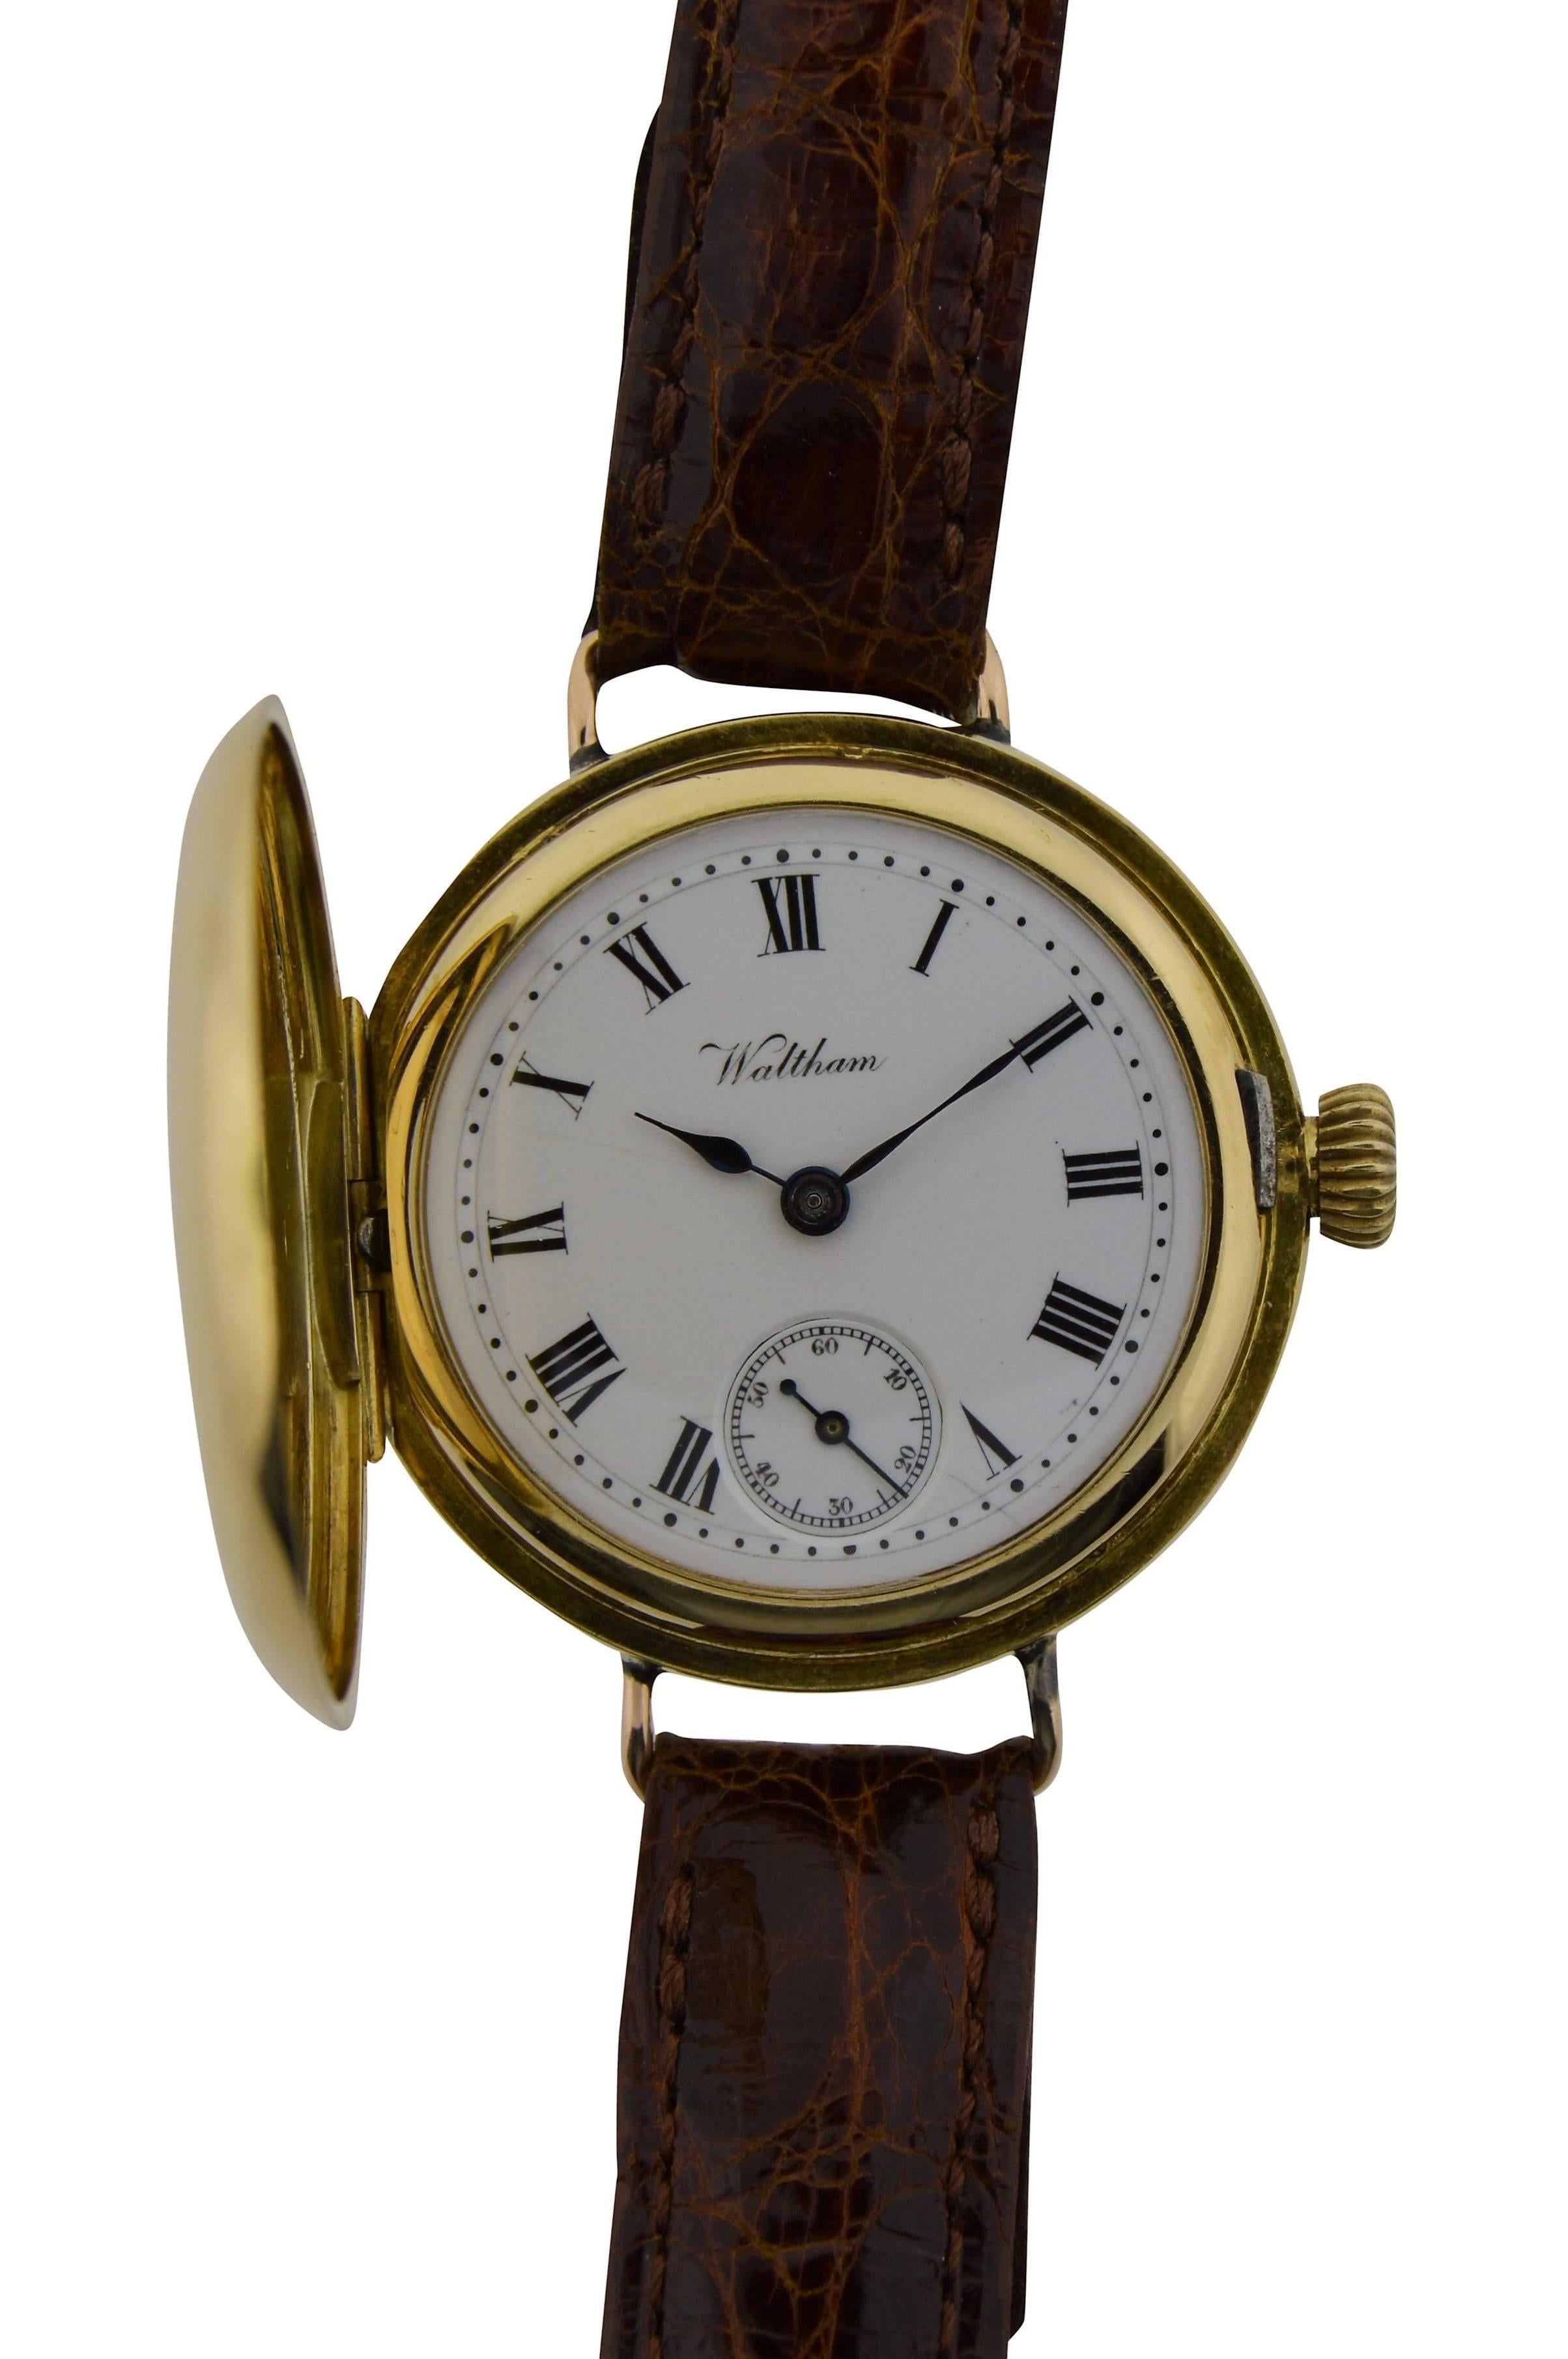 FACTORY / HOUSE: Waltham Watch Company
STYLE / REFERENCE: Military Campaign / Half Hunter
METAL / MATERIAL: 18Kt. Yellow Gold
CIRCA: 1903
DIMENSIONS: 36mm X 30mm
MOVEMENT / CALIBER: Manual Winding / 15 Jewels / 6/0 Size
DIAL / HANDS: Kiln Fired